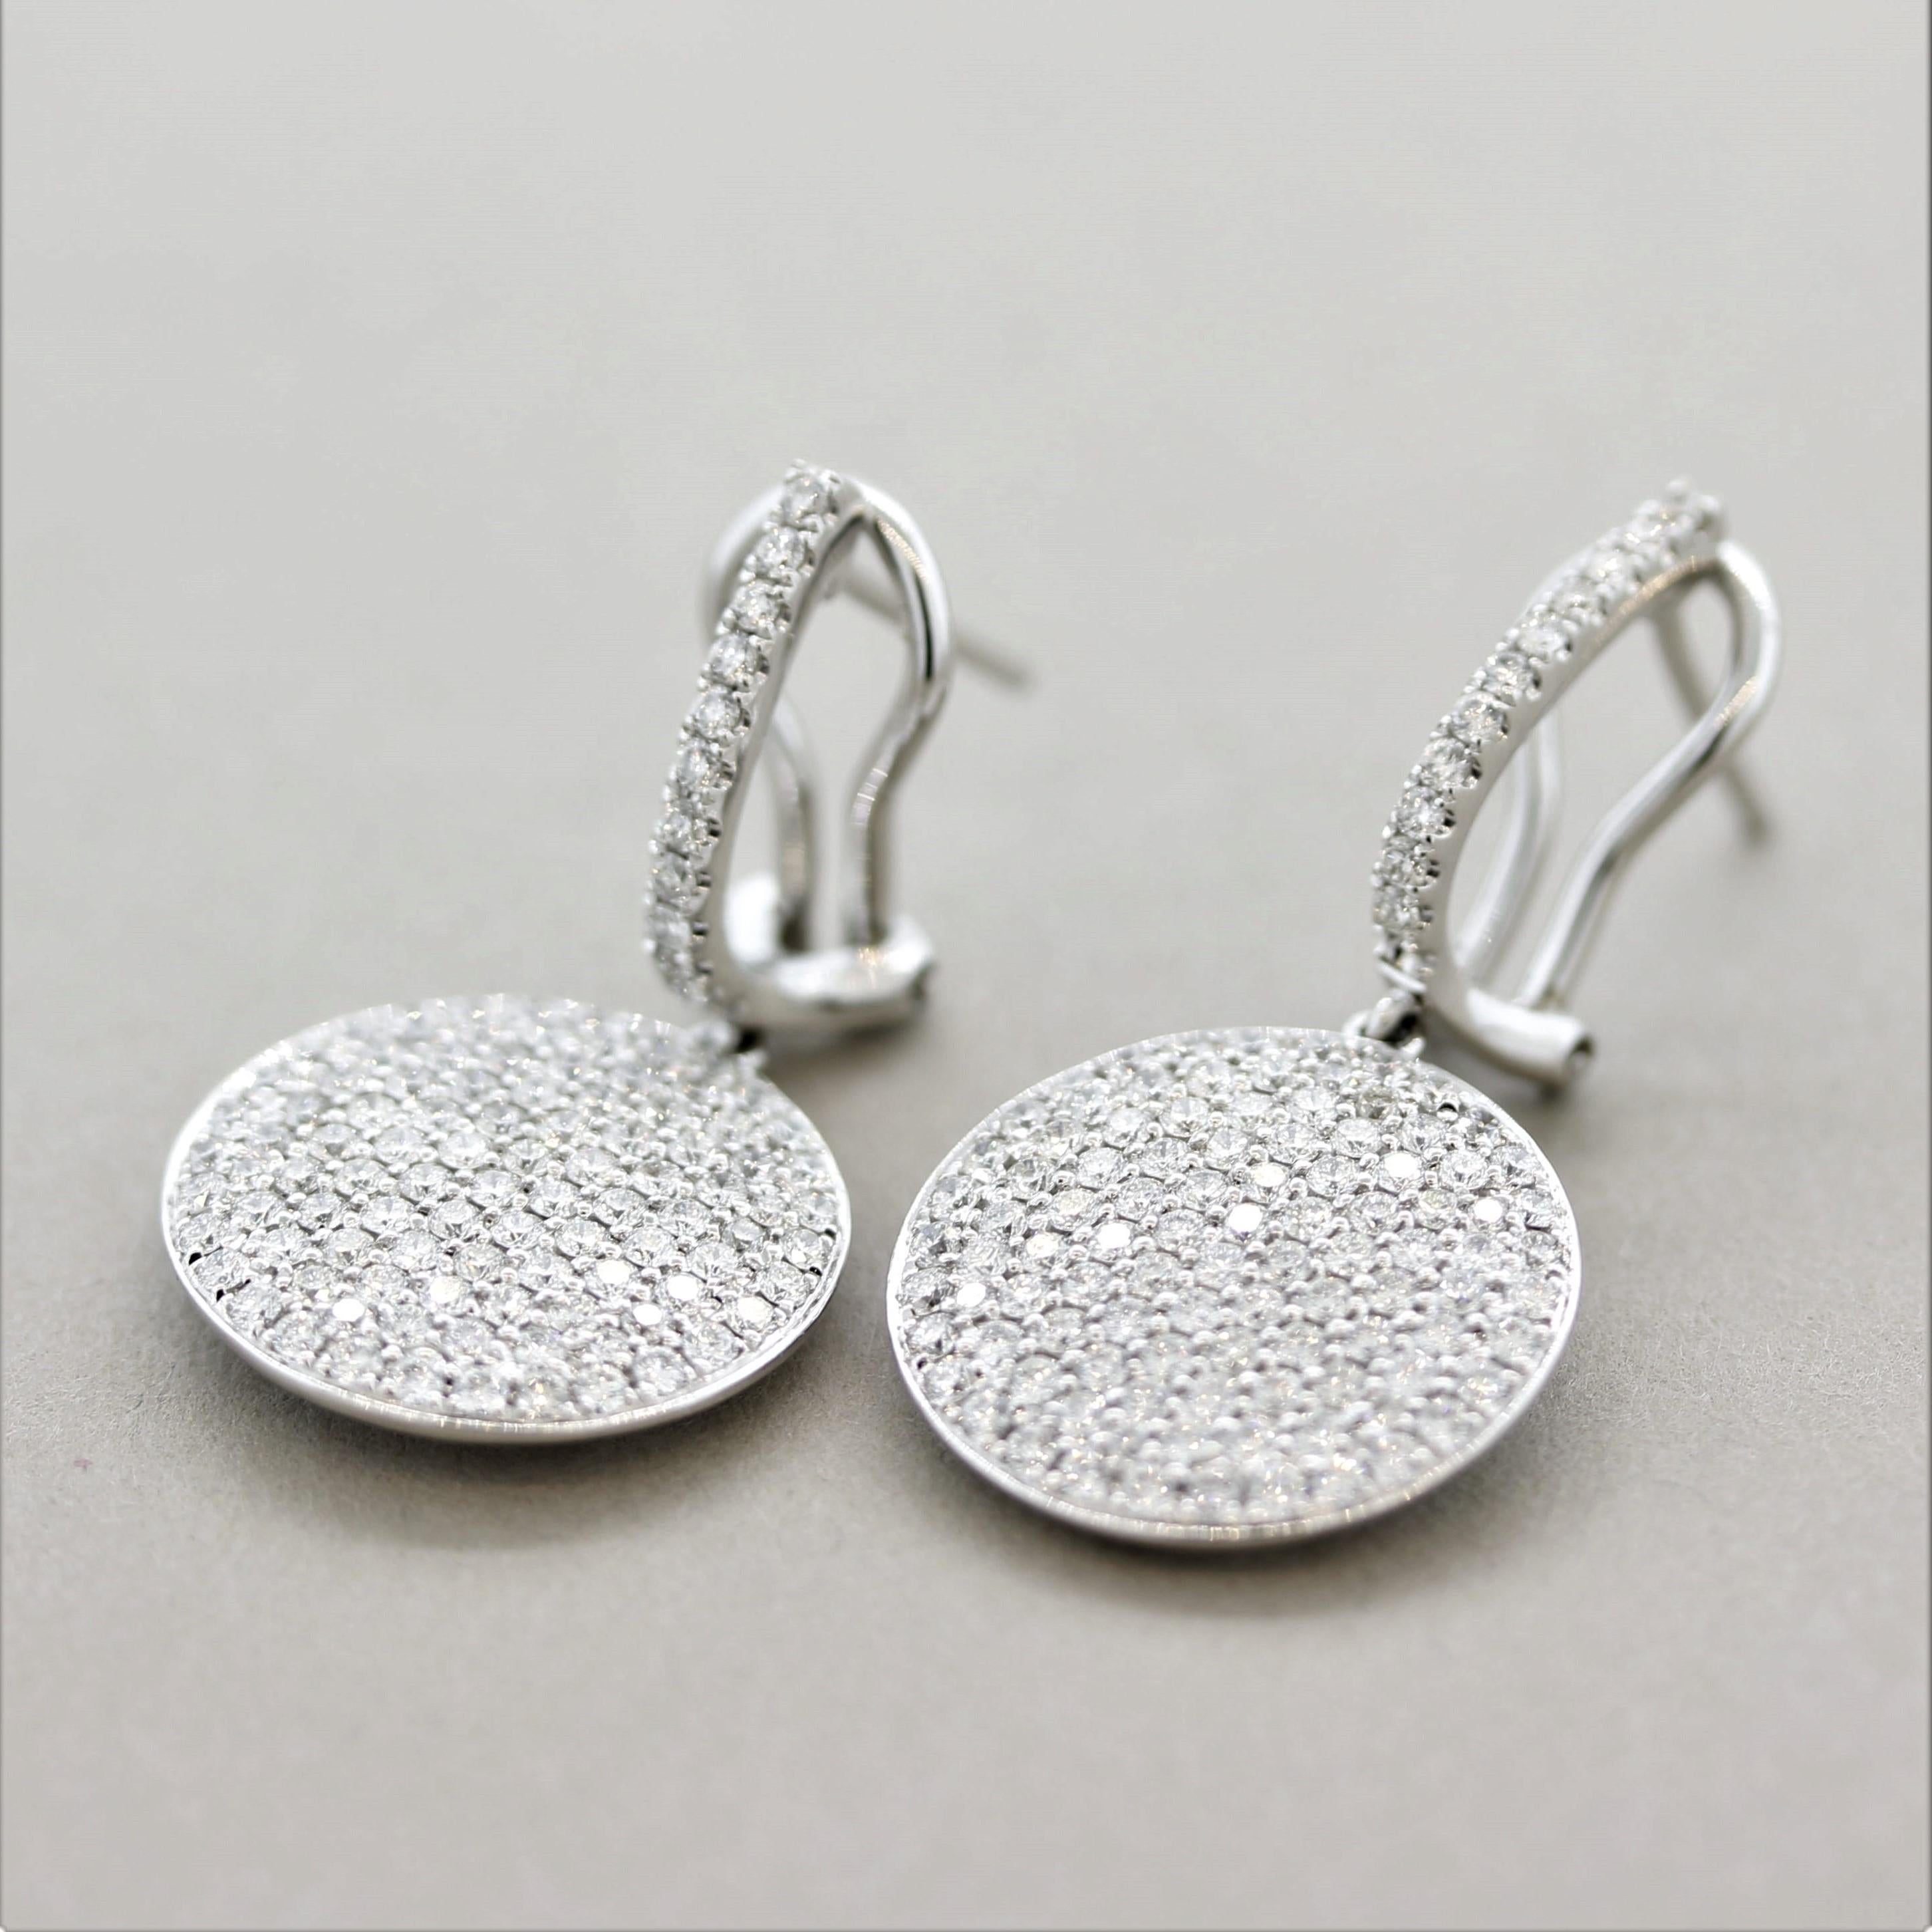 A lovely pair of drop earrings! They feature 1.93 carats of fine round brilliant-cut diamonds which are pave set over gold drop disks. The diamond studded disks drop and dangle from the earrings allowing the light to hit all angles of the stones.